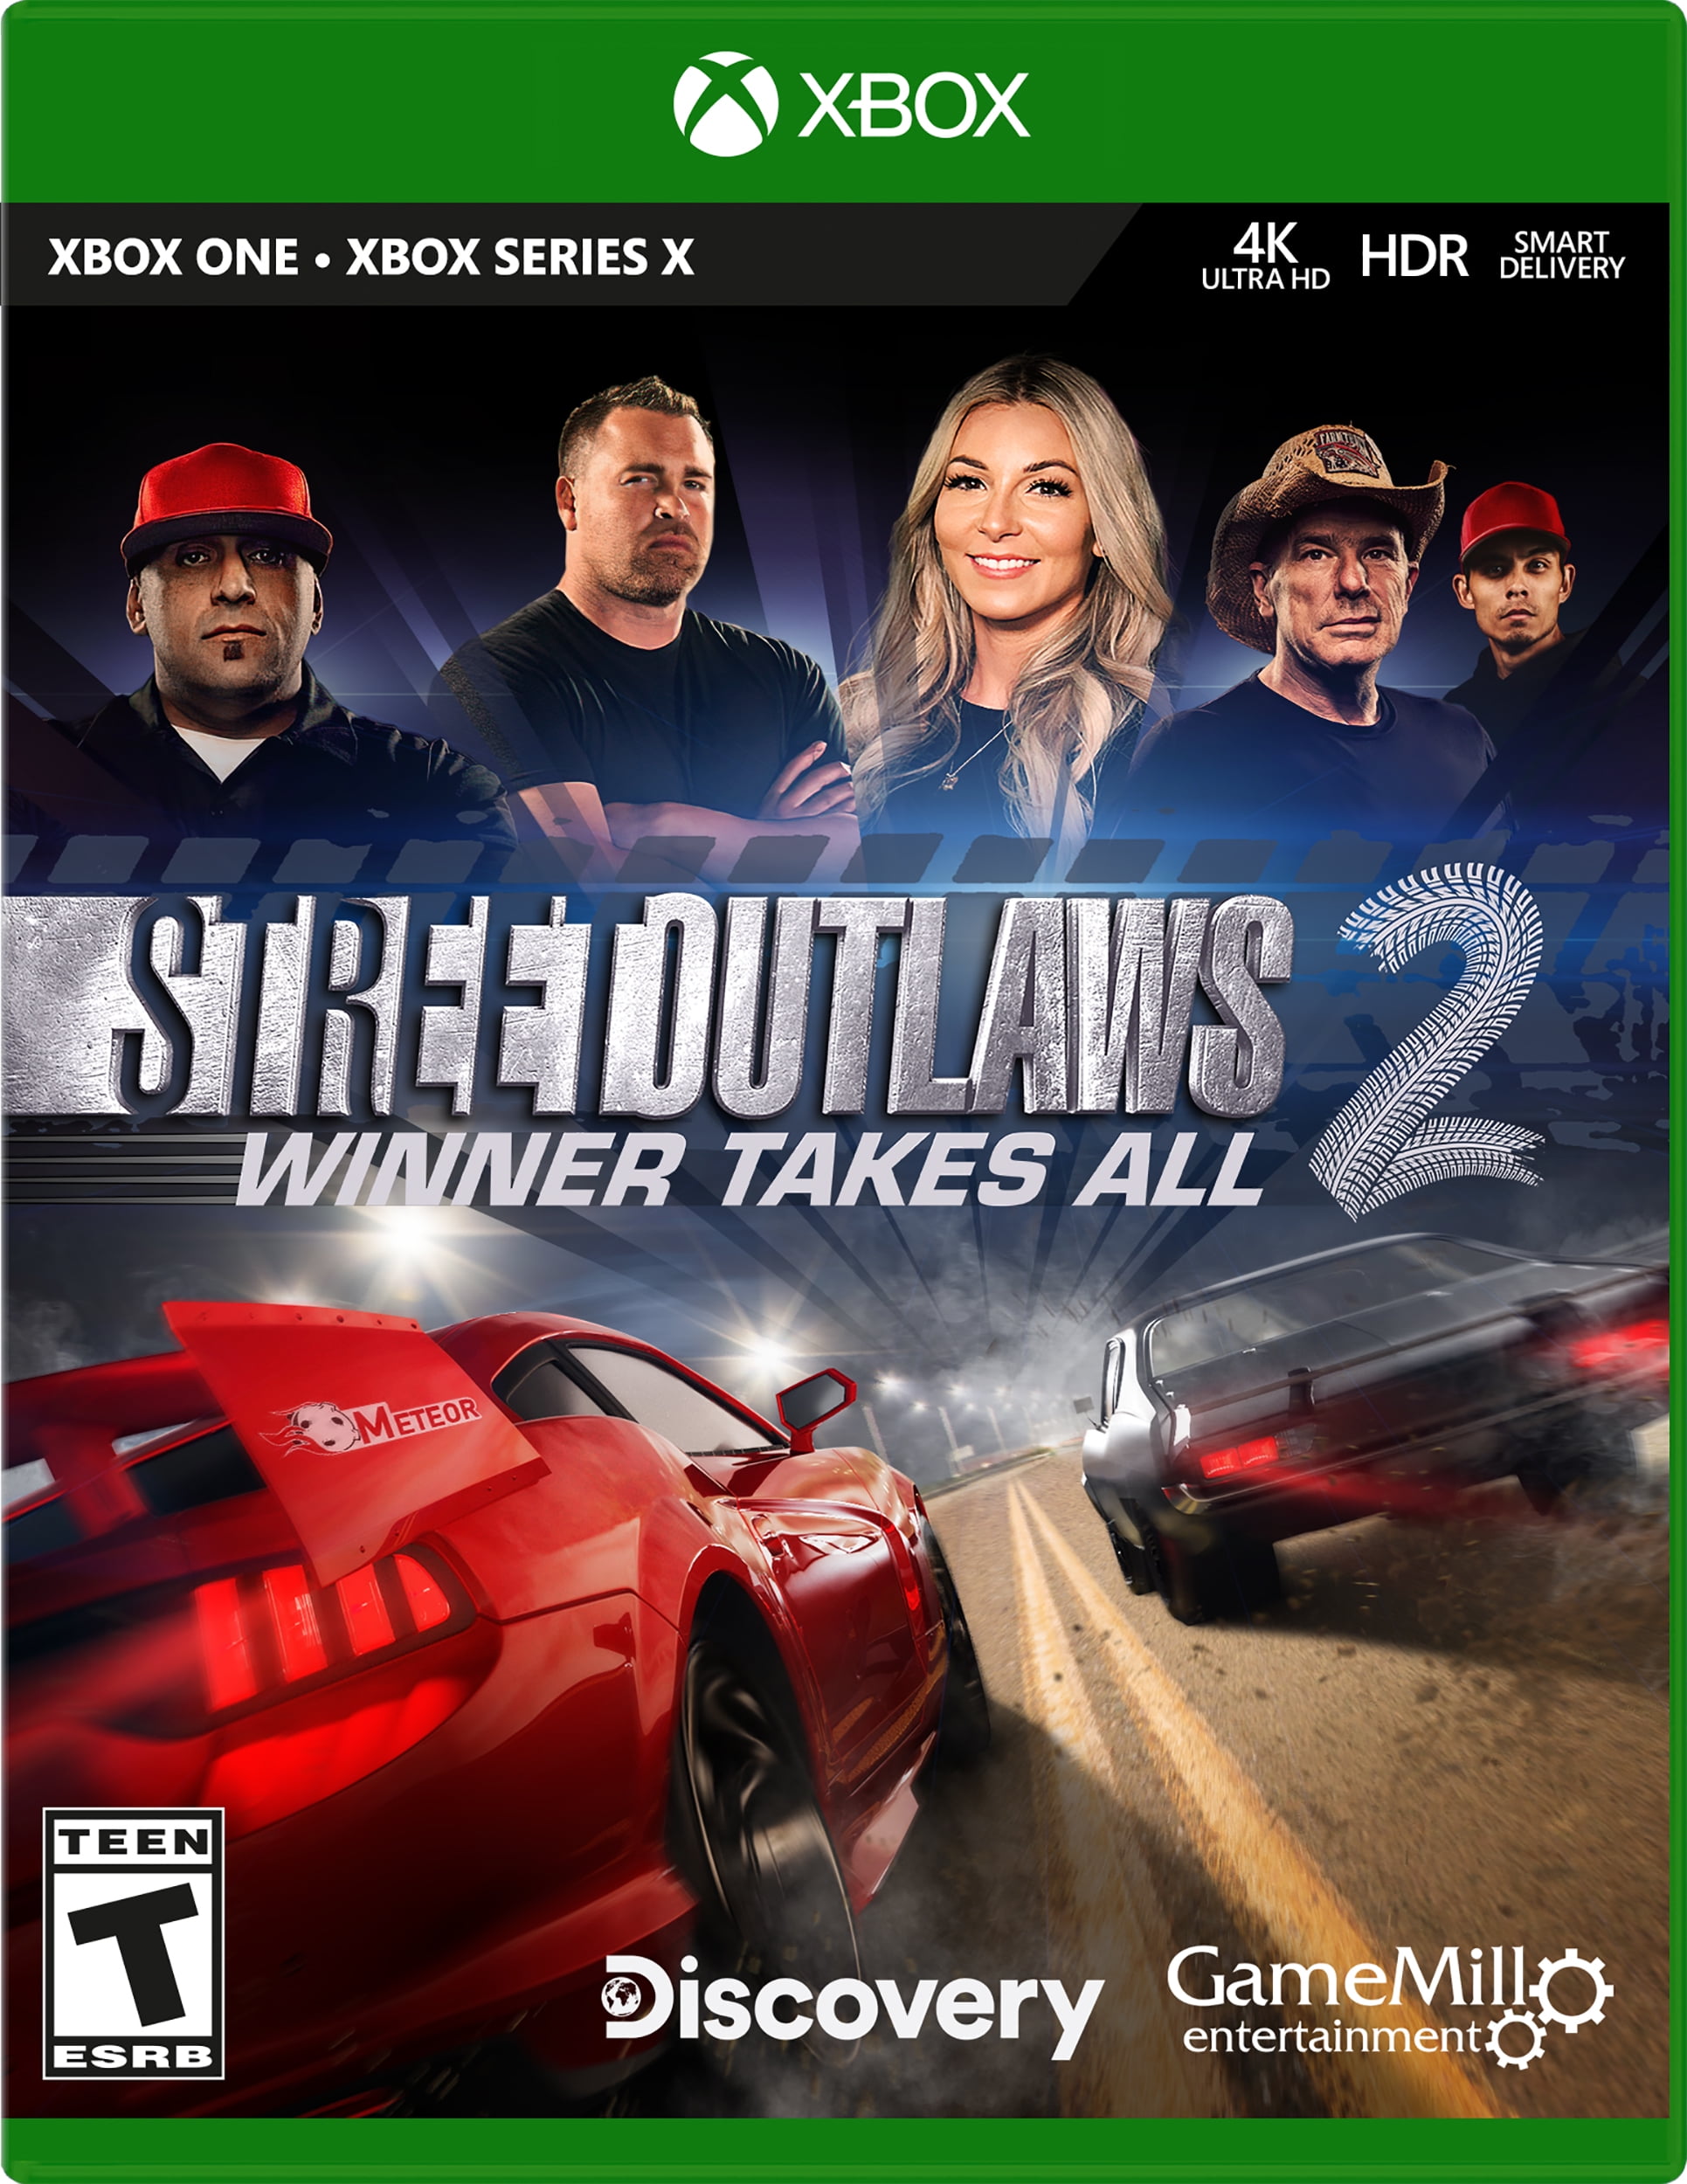 Street Outlaws 2: Winner Takes All, GameMill, Xbox One, Xbox Series X